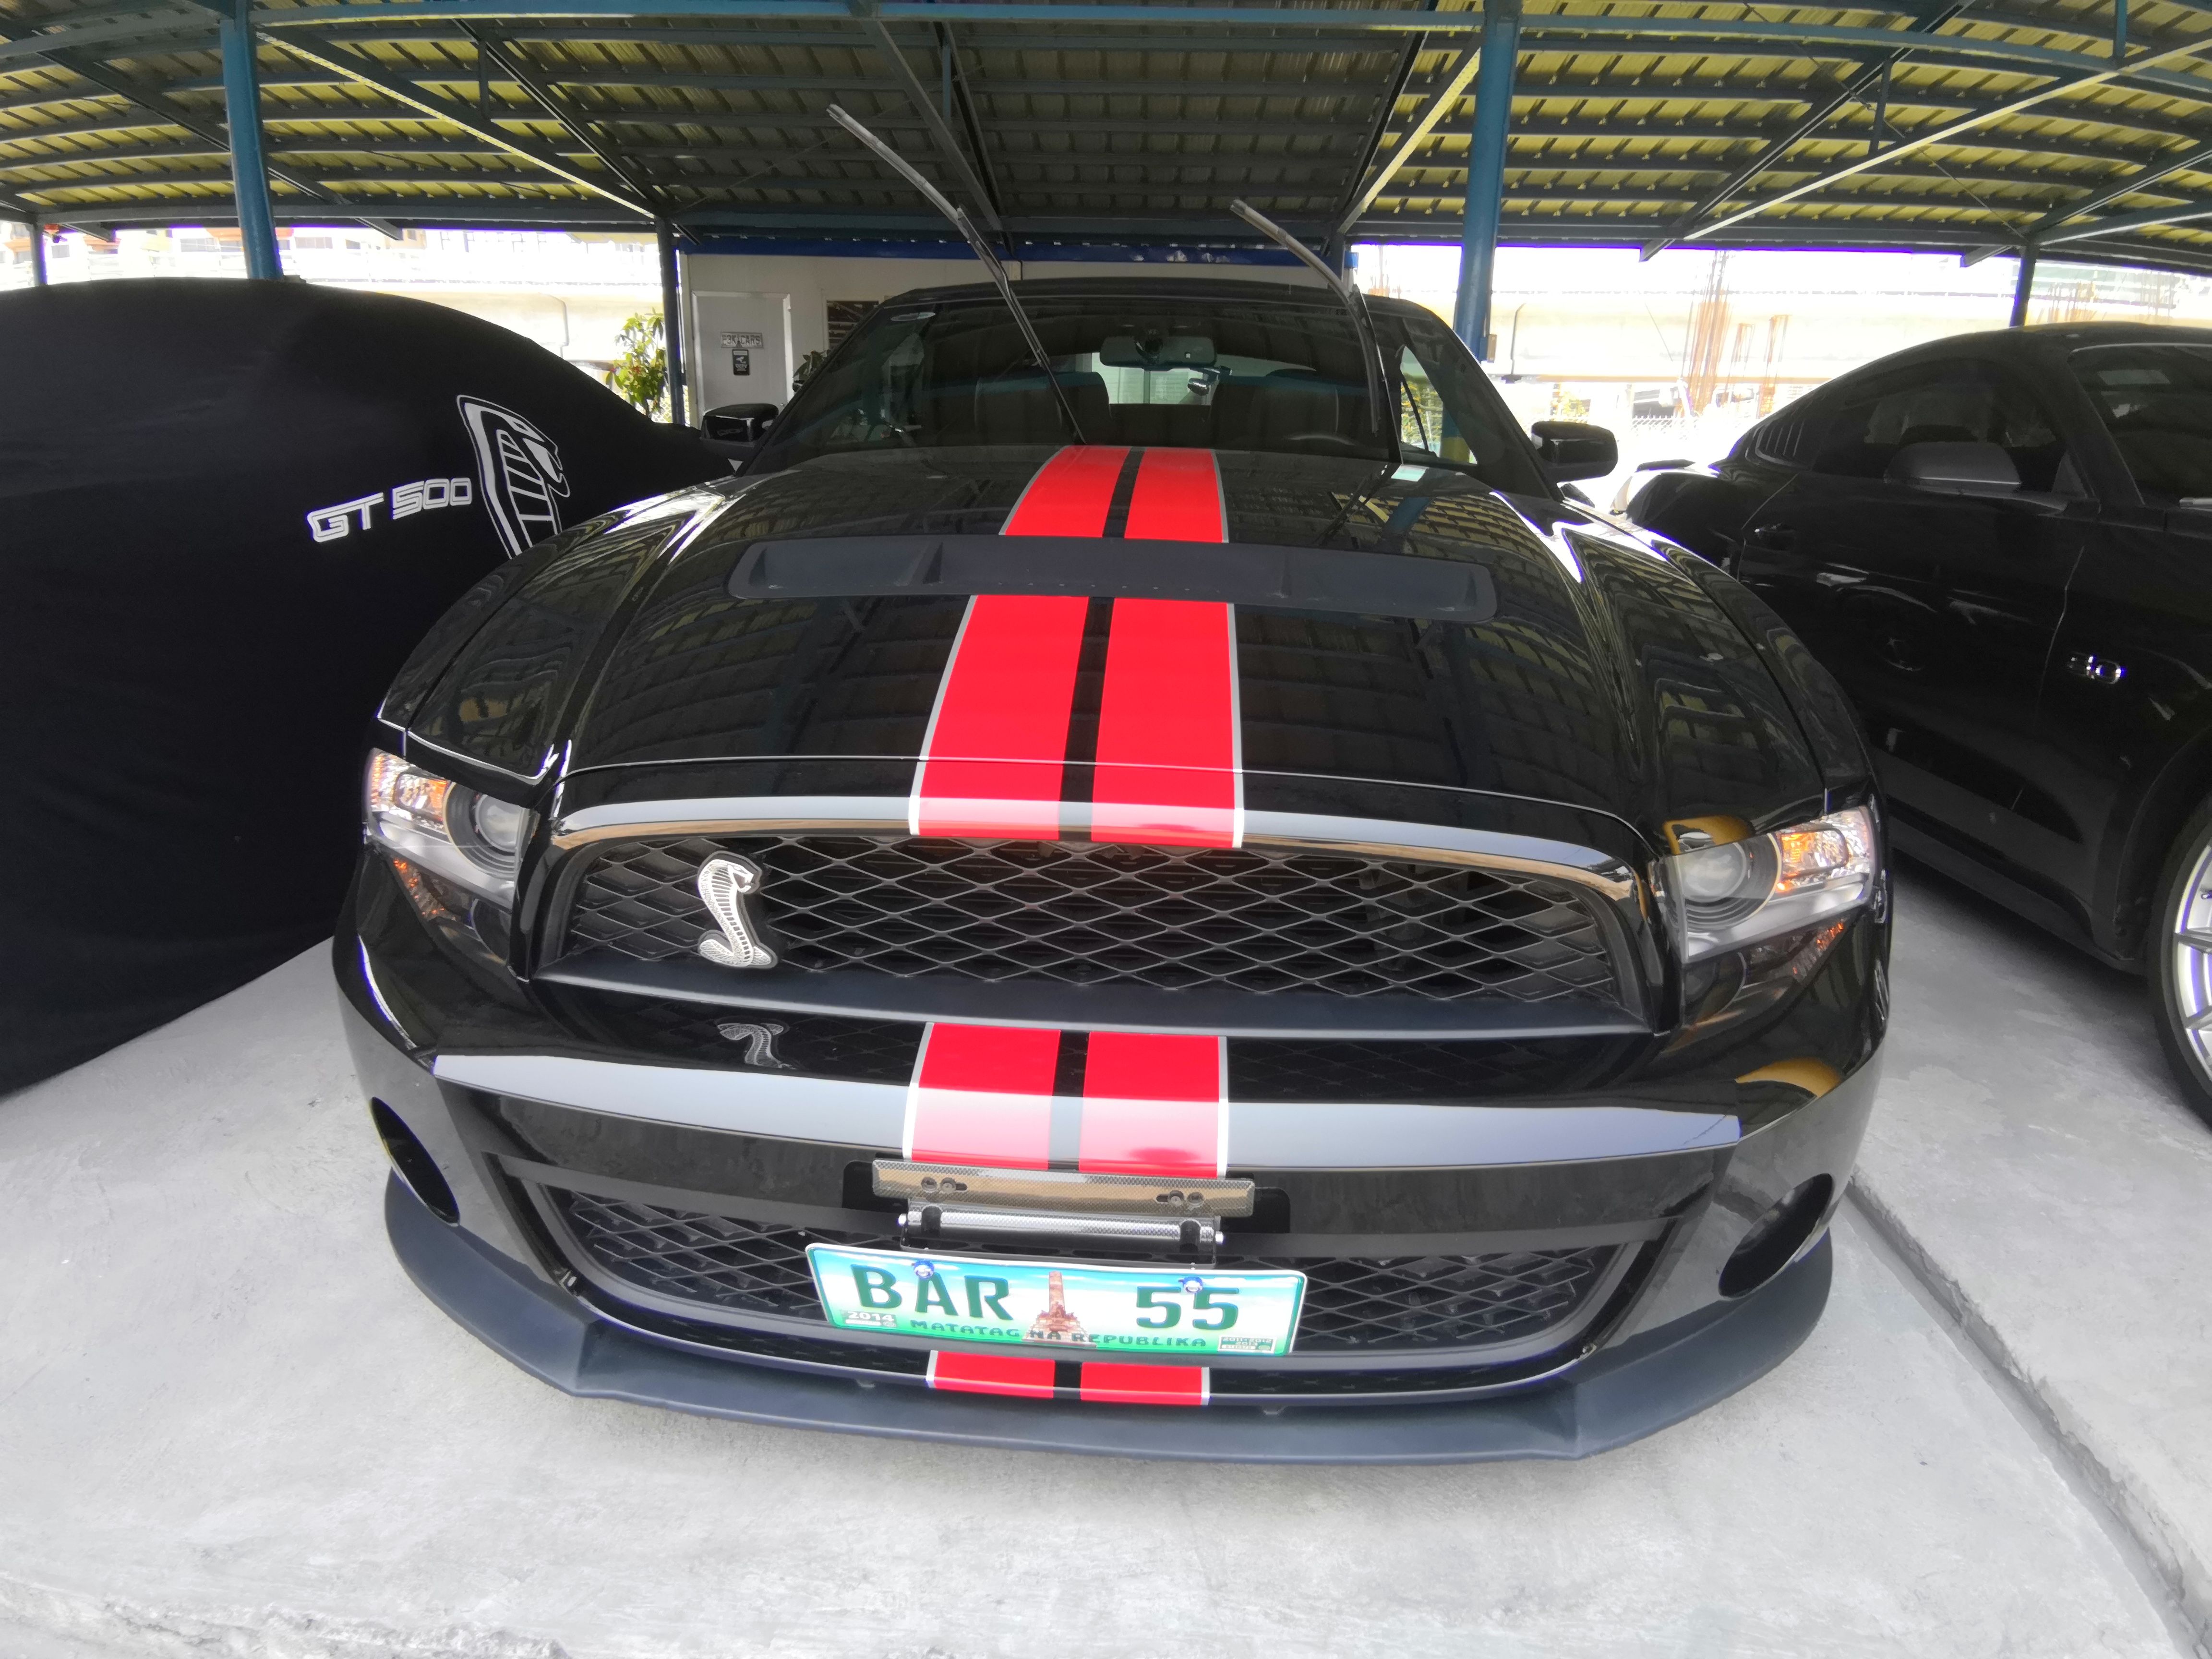 Used 2011 Ford Mustang Shelby GT500